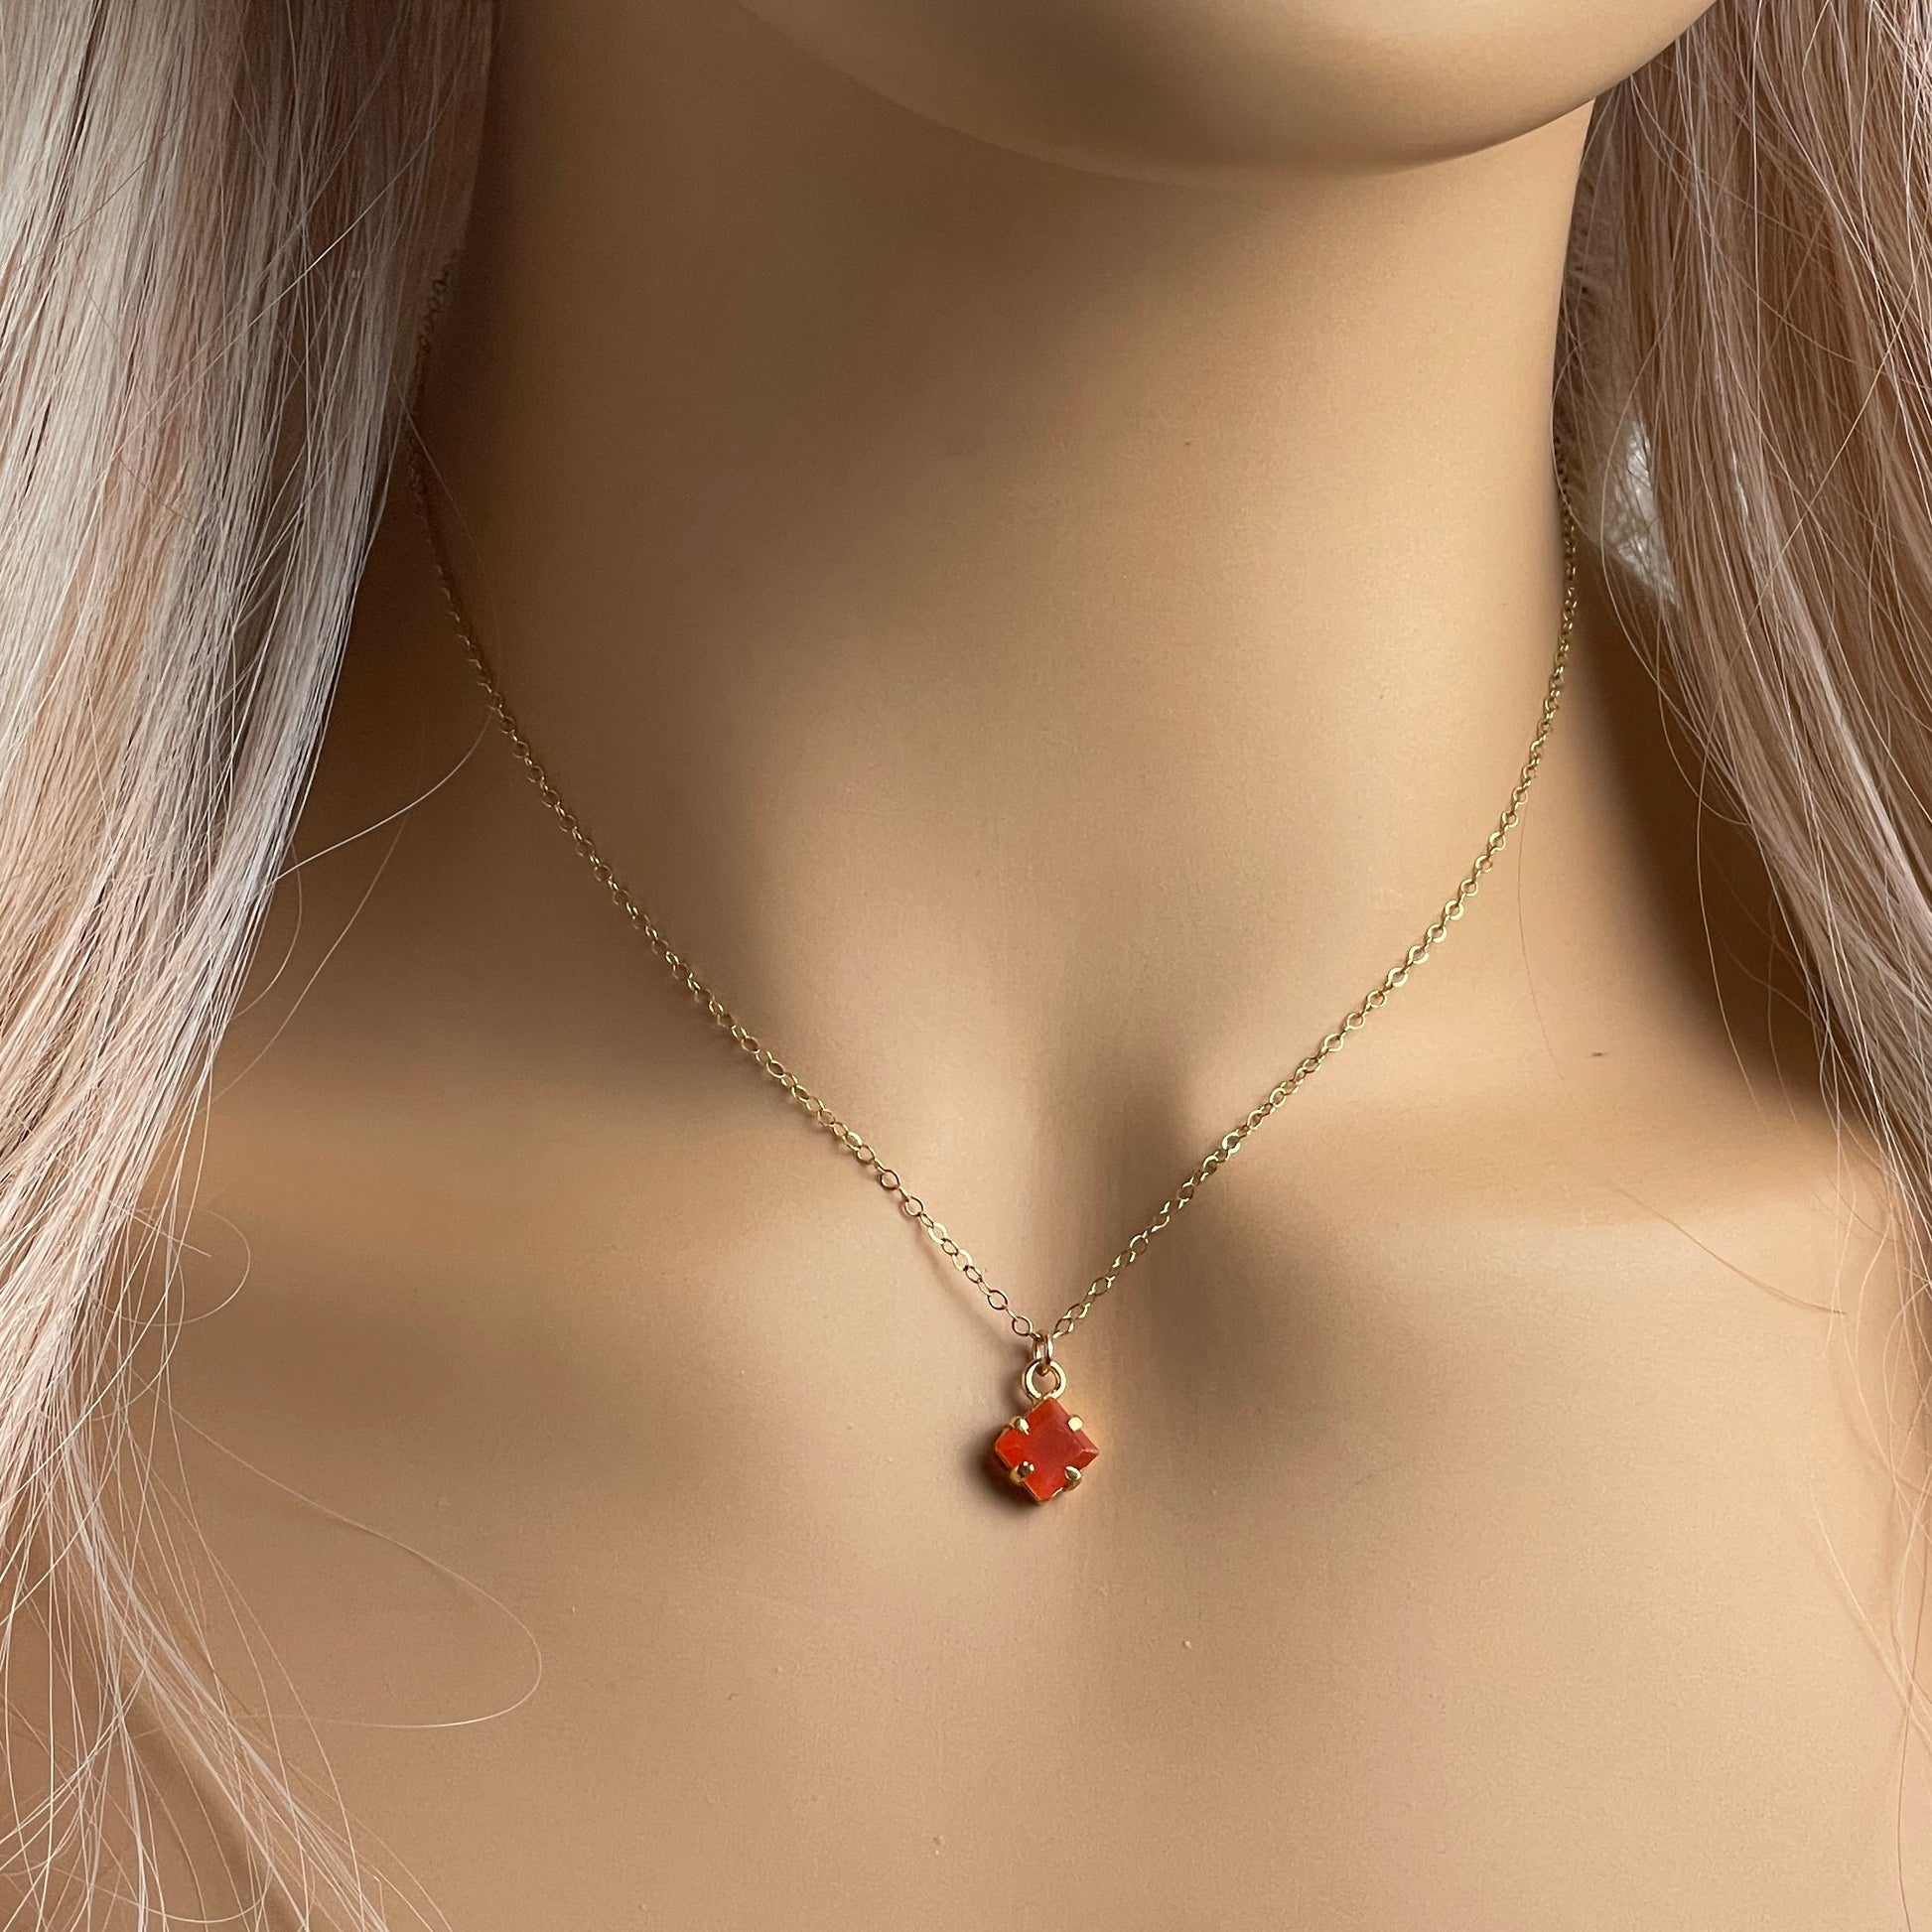 Tiny Carnelian Necklace, Orange Crystal Charm Necklace Layering, 14K Gold Filled Chain, Gift For Wife, M6-30